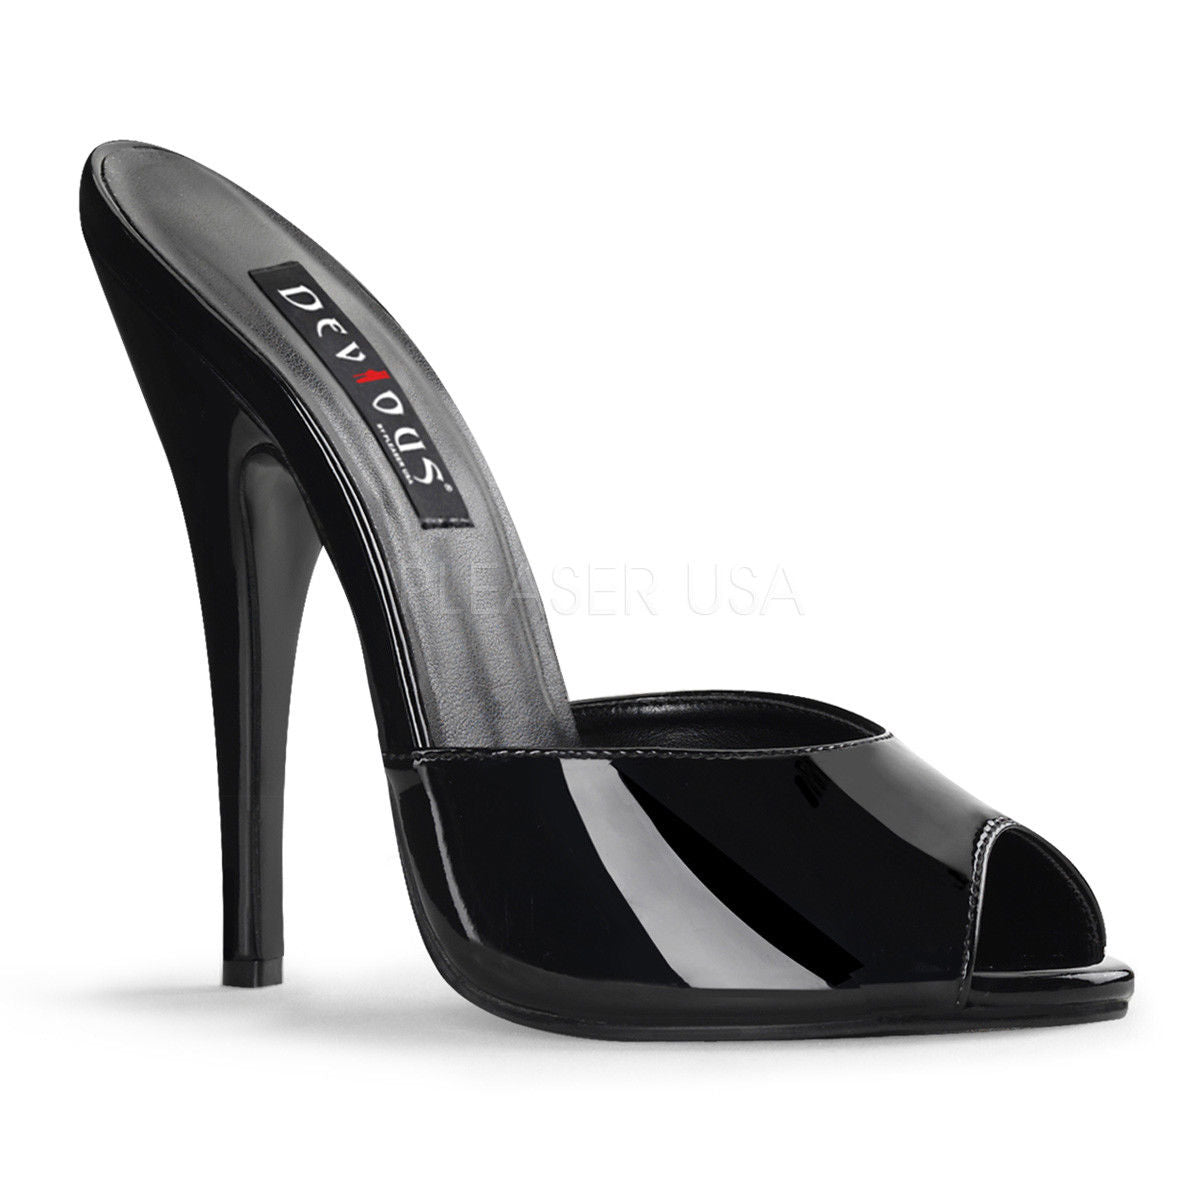 DEVIOUS Domina-101 Sexy Fetish Leather Slides Mules Drag 6" Heels Women's 4-15 - A Shoe Addiction